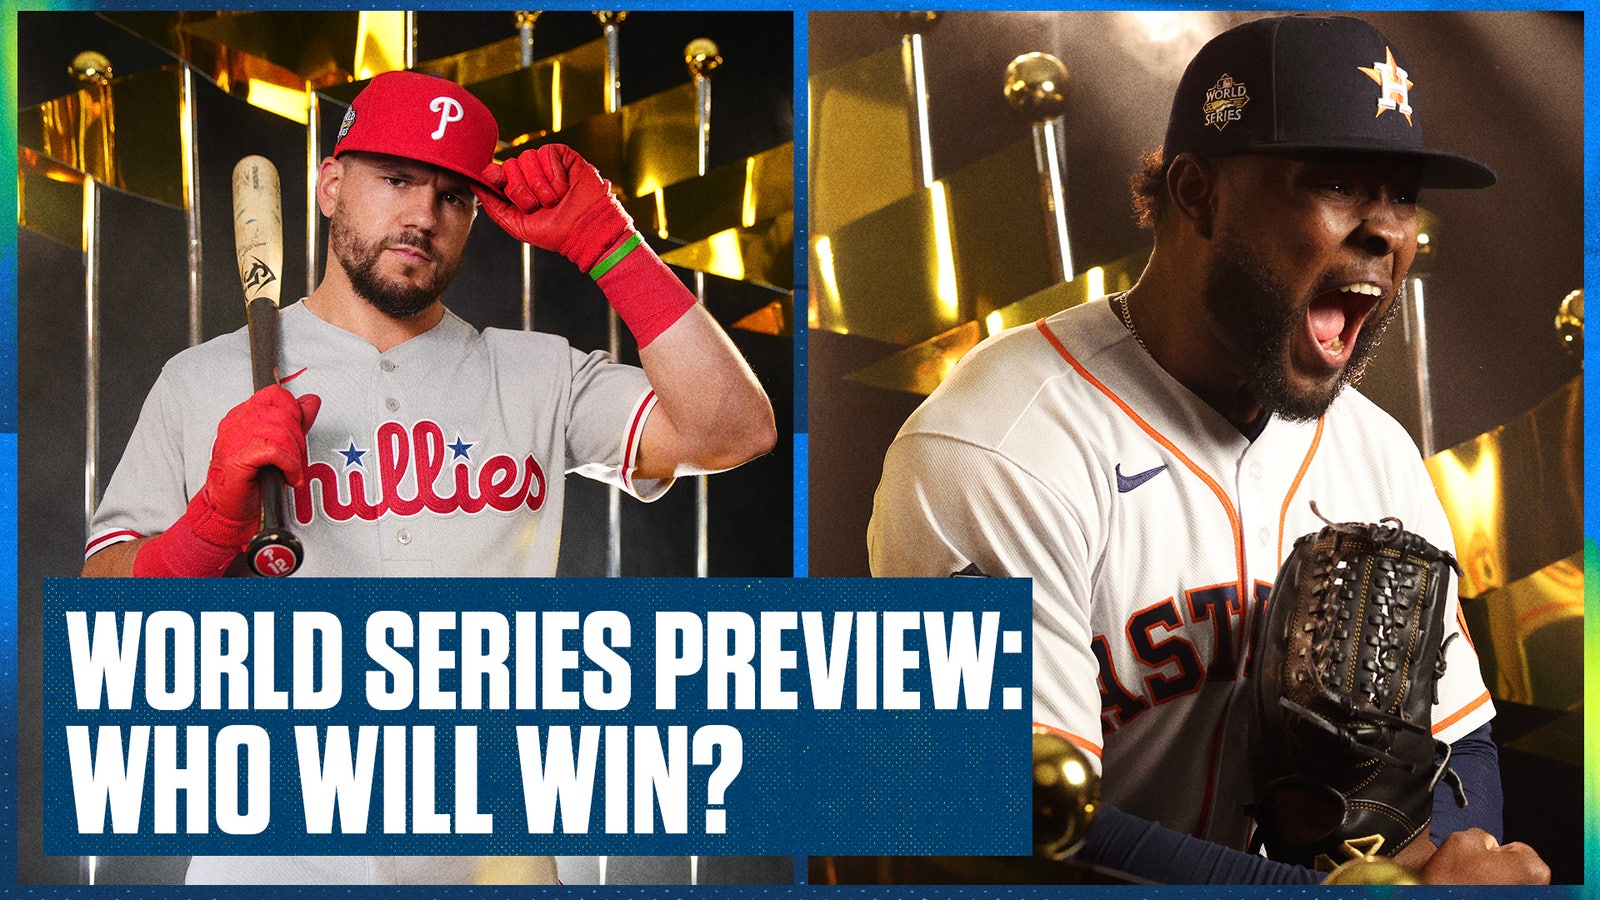 World Series Preview: Who is going to take home the title - Astros or Phillies?